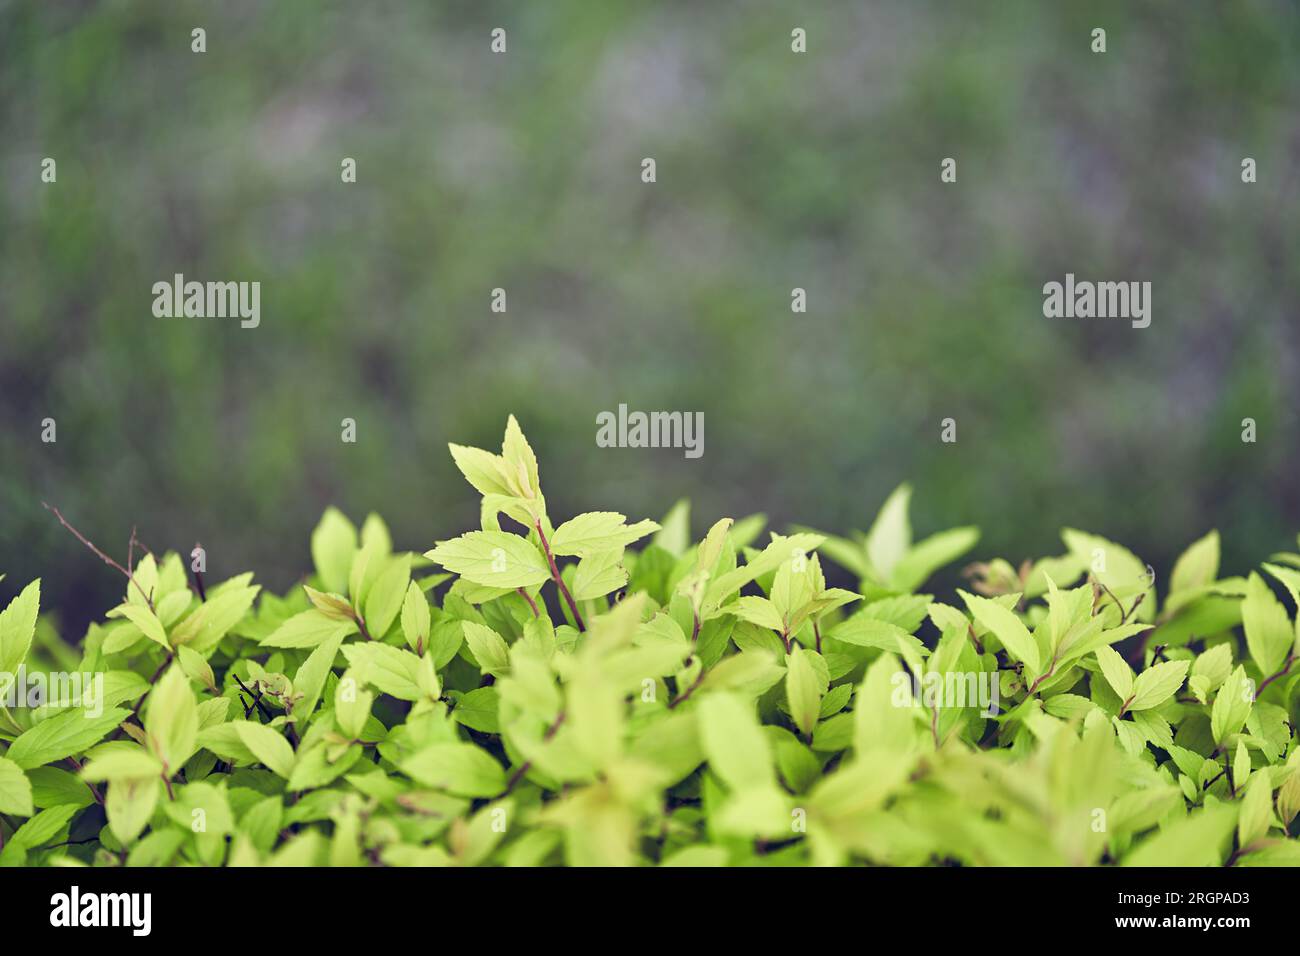 Background of Japanese spirea leaves. An ornamental plant in the garden. Eco-wall. Textured background of small green leaves on a blurry background. Clean environment. High quality photo Stock Photo